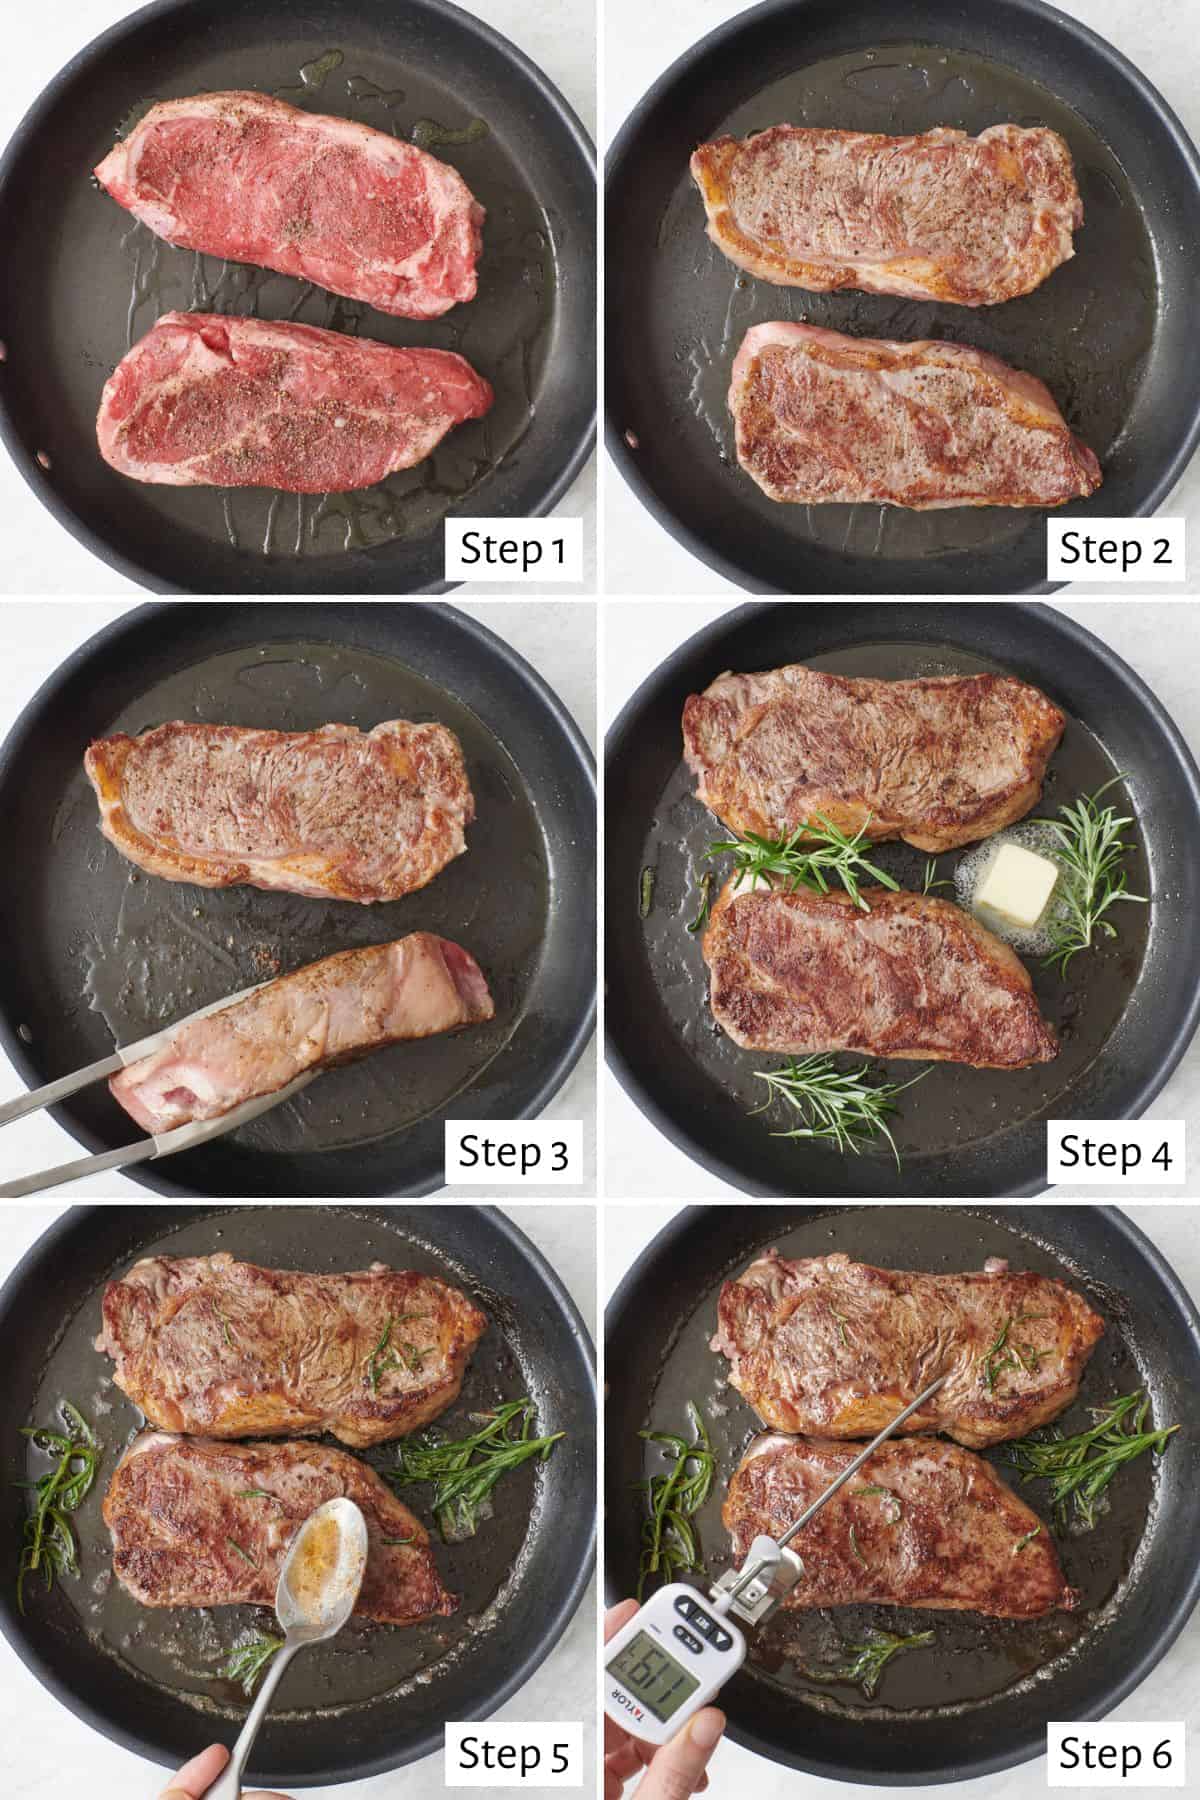 6-image collage of cooking the steak: 1 - two NY strips on a non-stick skillet; 2 - After flipping to show a golden brown crust; 3 - One steak flat down and the other one on its side held up with tongs; 4 - Final side getting cooked, butter and thyme added before melting; 5 - Spooning butter over steak; 6 - Meat thermometer taking temperature of a steak.